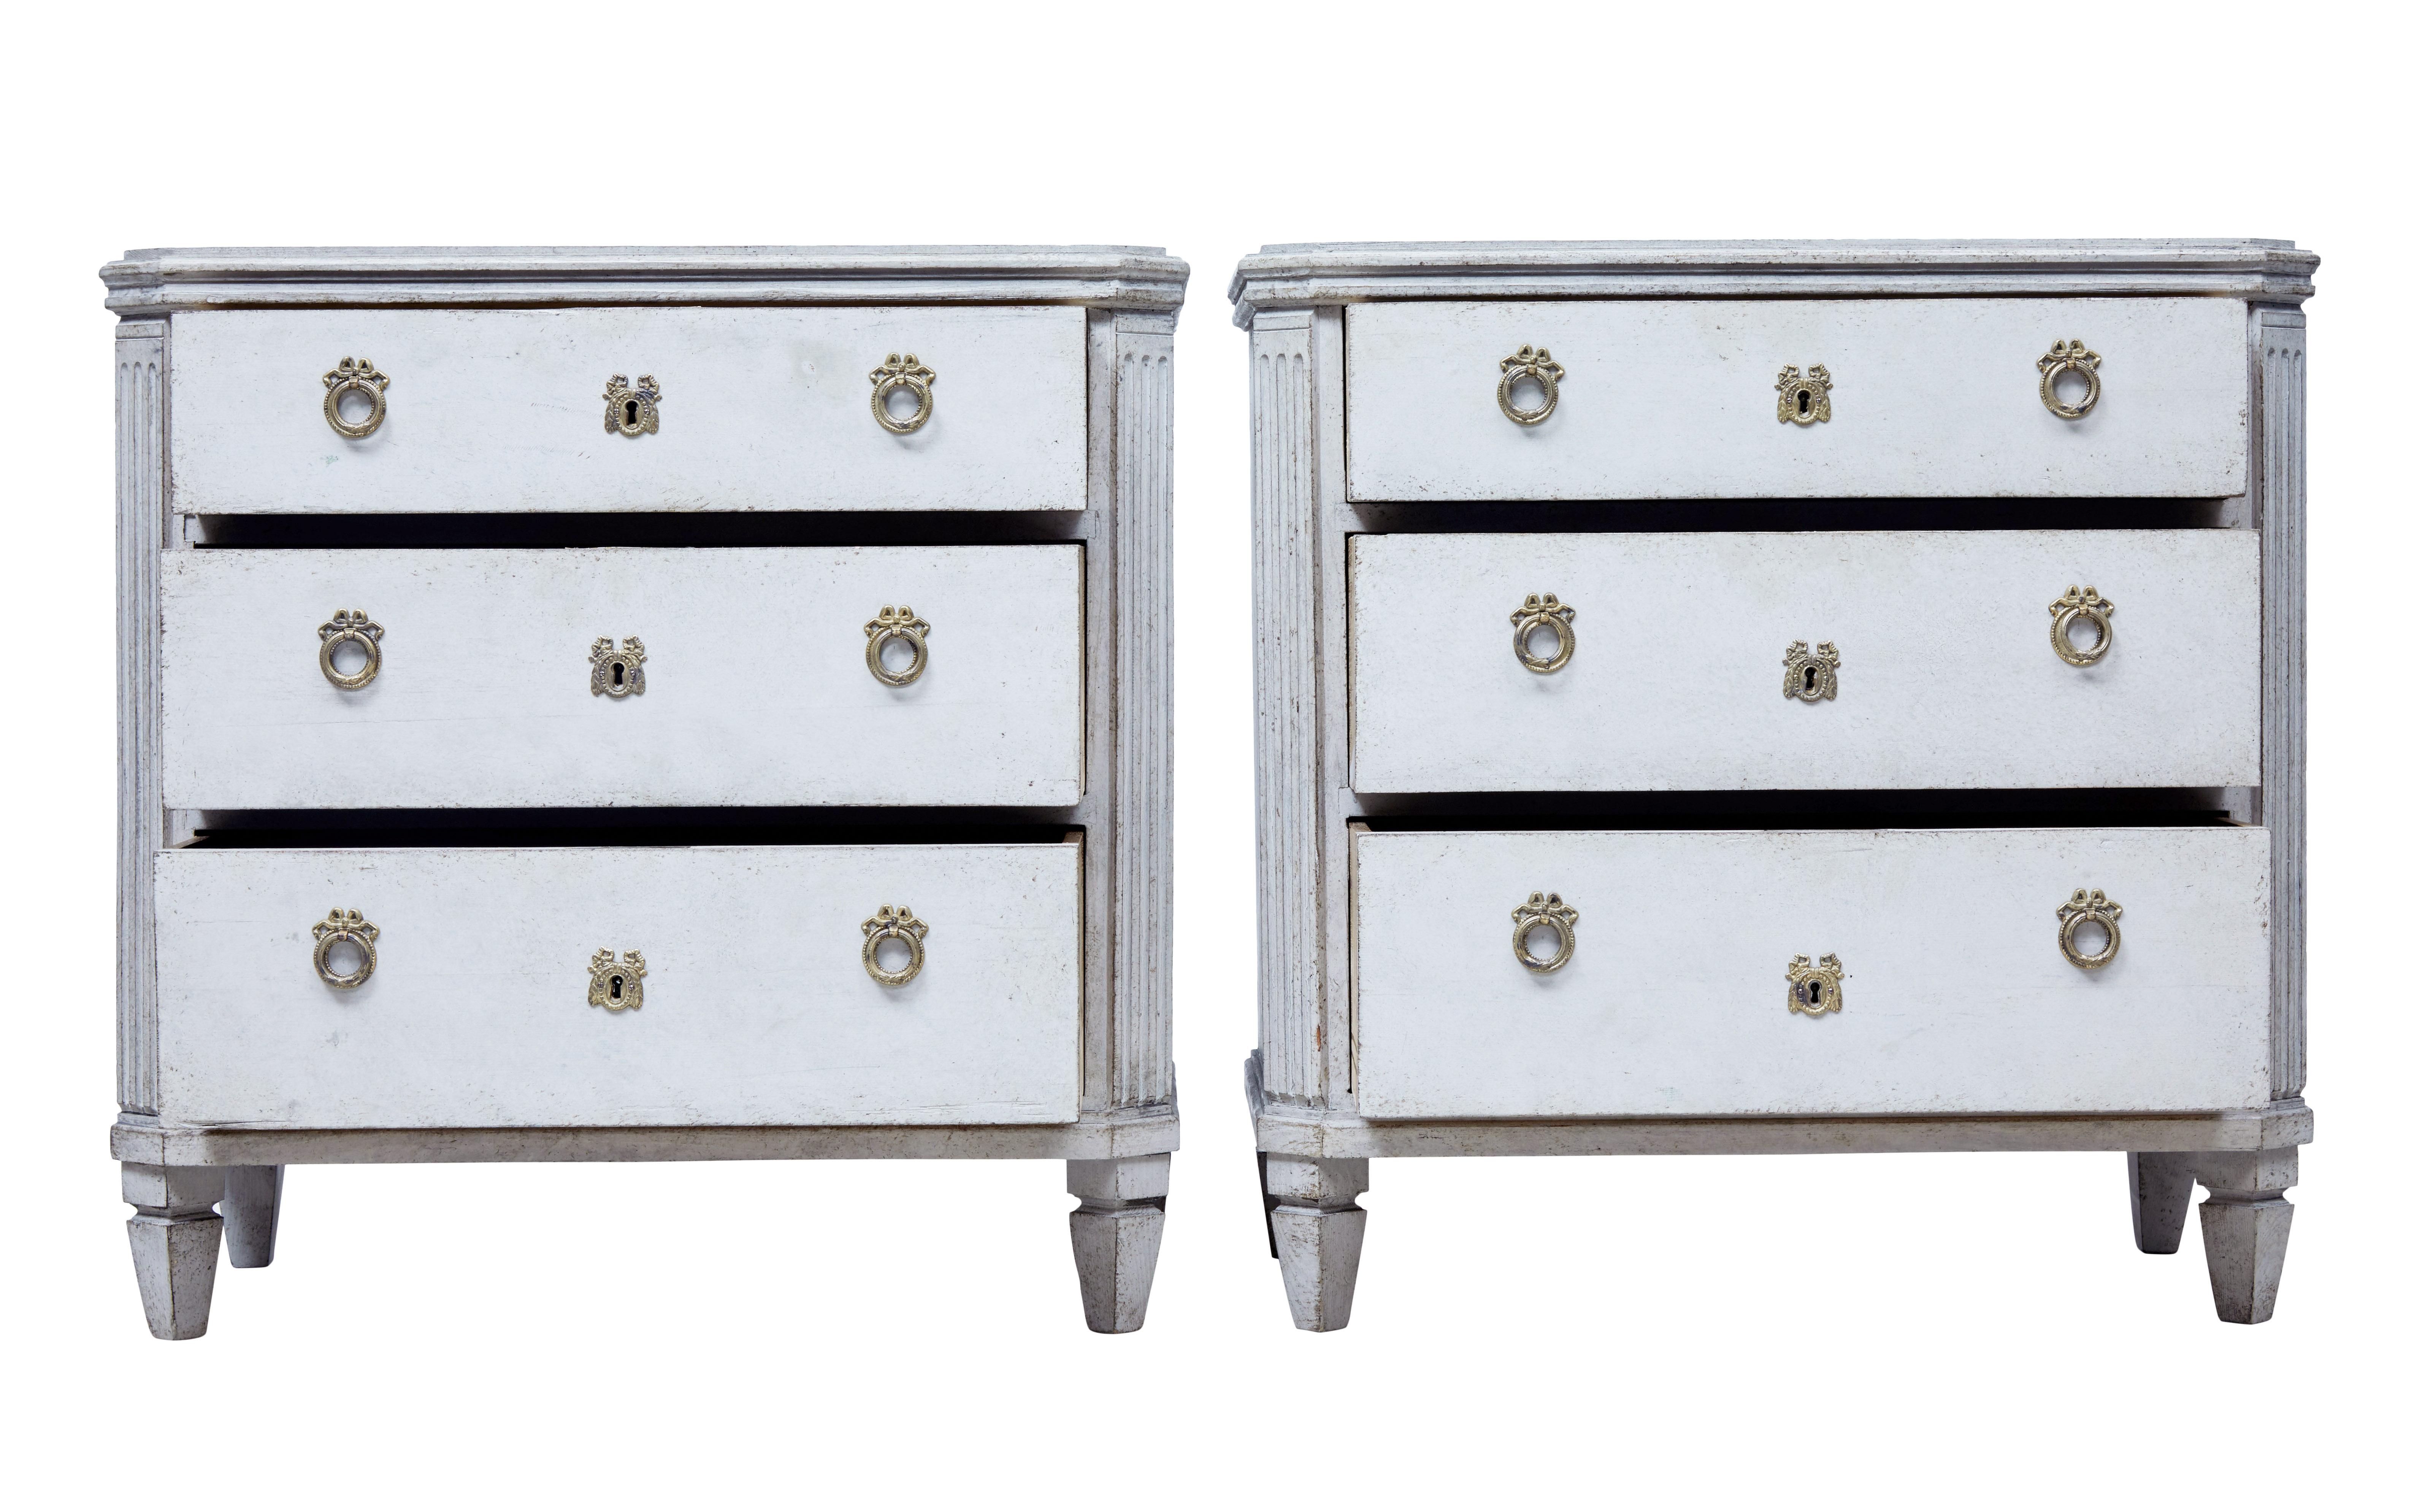 Fine quality pair of Swedish commodes in the Gustavian taste, circa 1870.

Stepped top and 3-drawers with working locks and fitted with later handles. Canted corners with fluted detailing. Standing on tapered legs.

Later paint which has taken